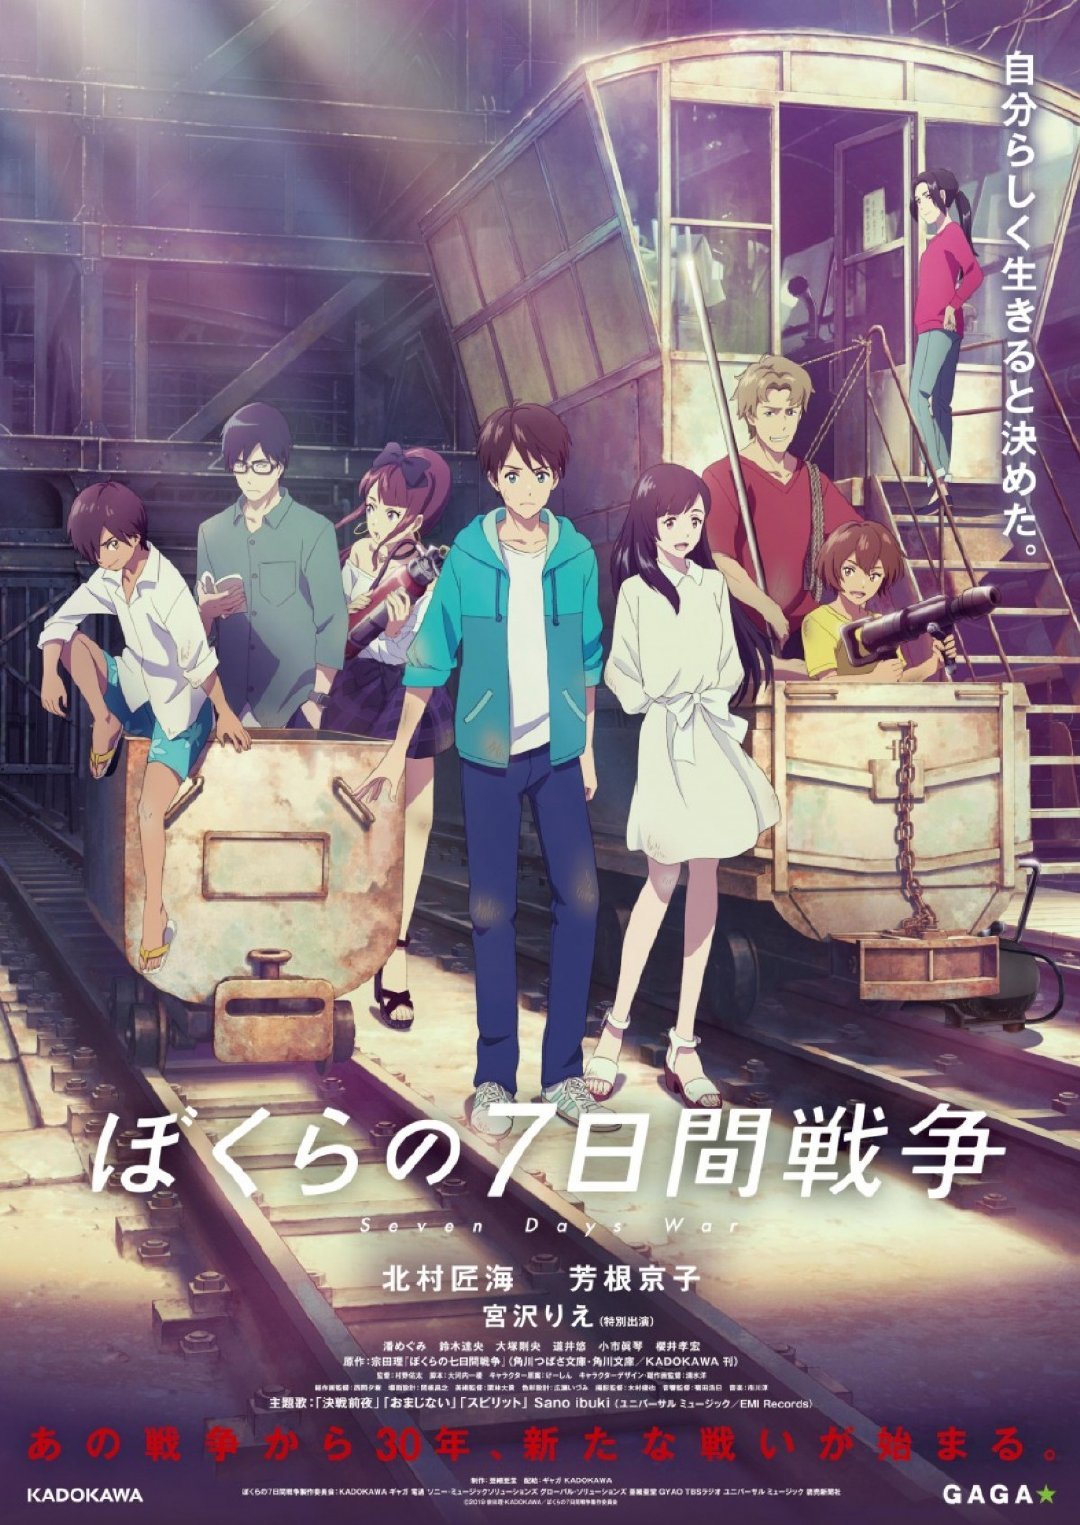 A new poster visual for the anime film â��Bokura no Nanokakan Sensouâ�� (Seven Days War) has been unveiled. Itâ��ll be screened in Japanese theaters December 13th.
The story is based of Osamu Soudaâ��s childrenâ��s novel series first released in...